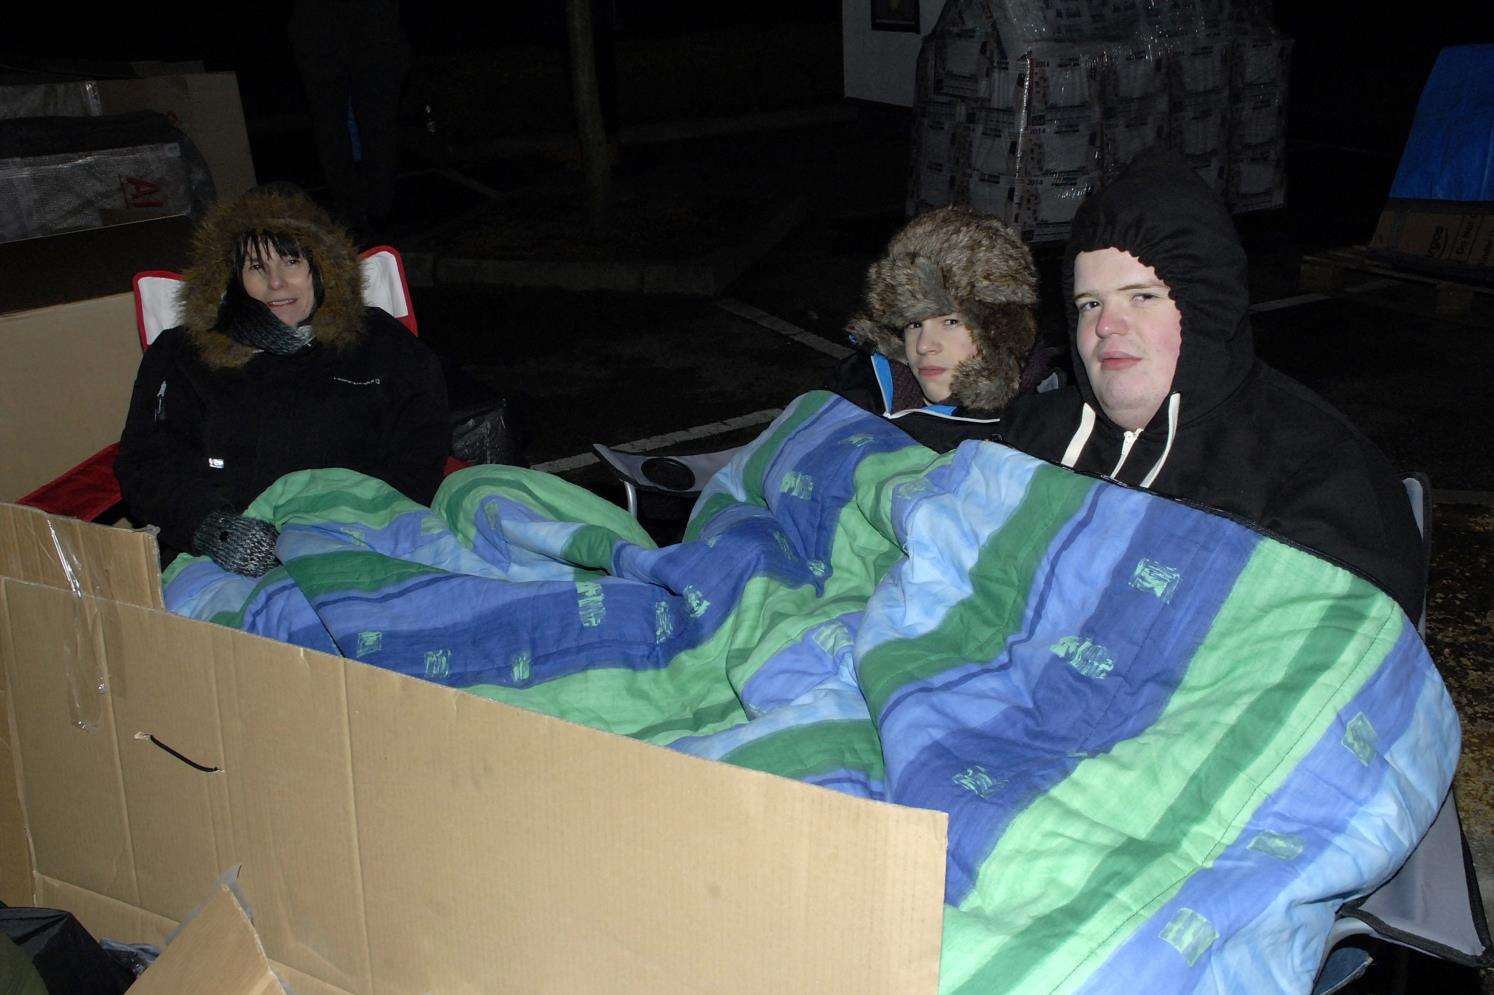 Elaine Steer from mhs homes with son Harry Steer and nephew Ryan Fuller during previous sleep out